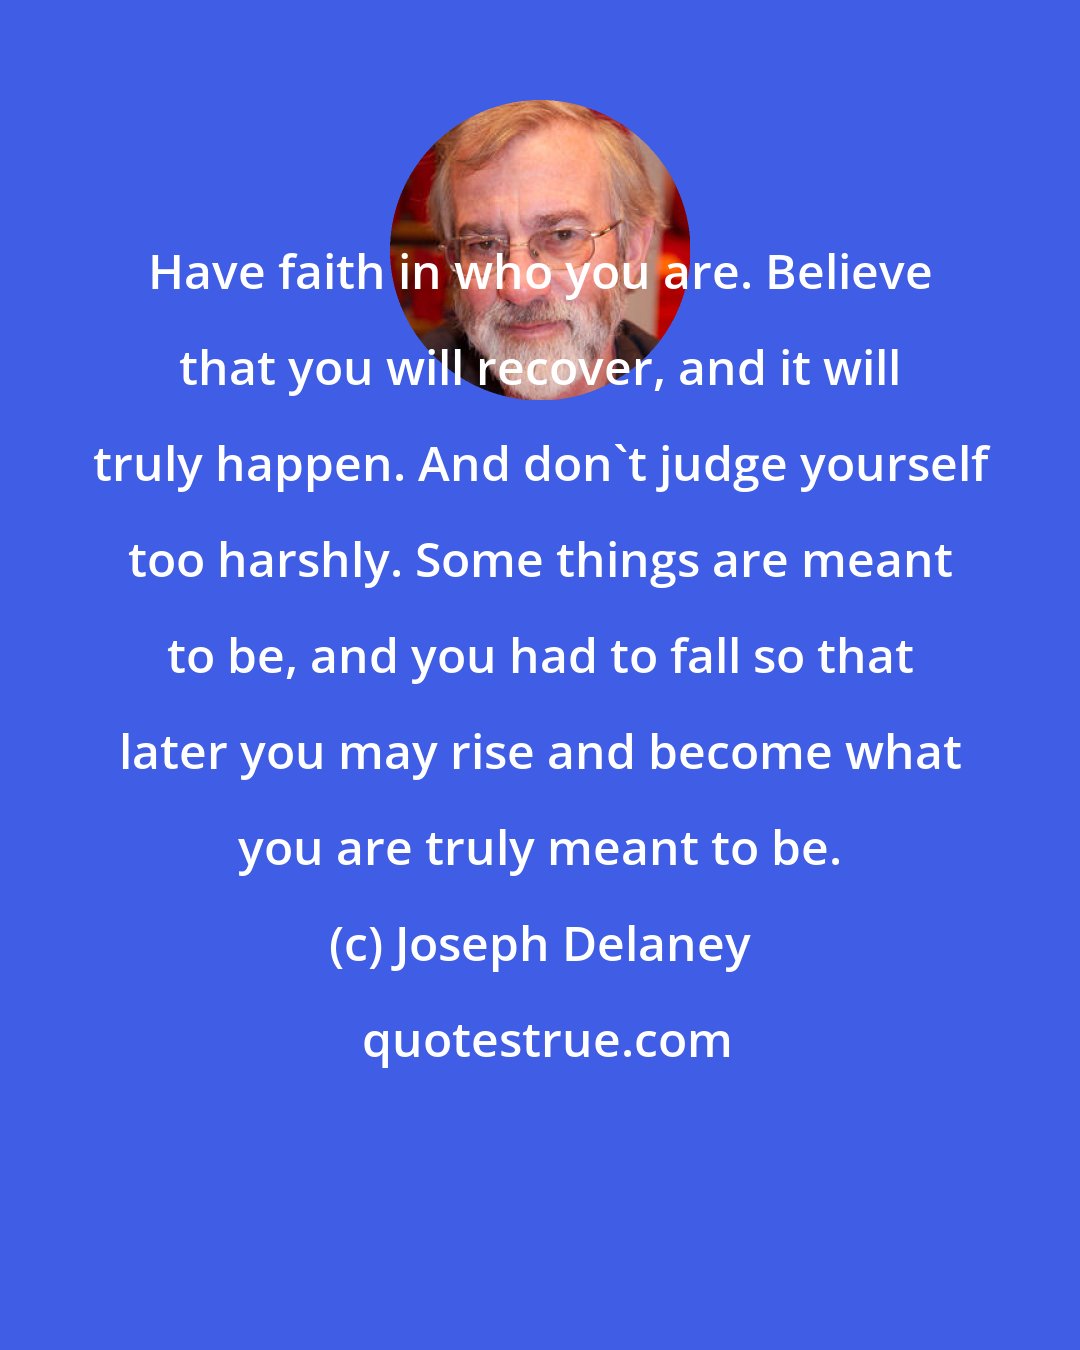 Joseph Delaney: Have faith in who you are. Believe that you will recover, and it will truly happen. And don't judge yourself too harshly. Some things are meant to be, and you had to fall so that later you may rise and become what you are truly meant to be.